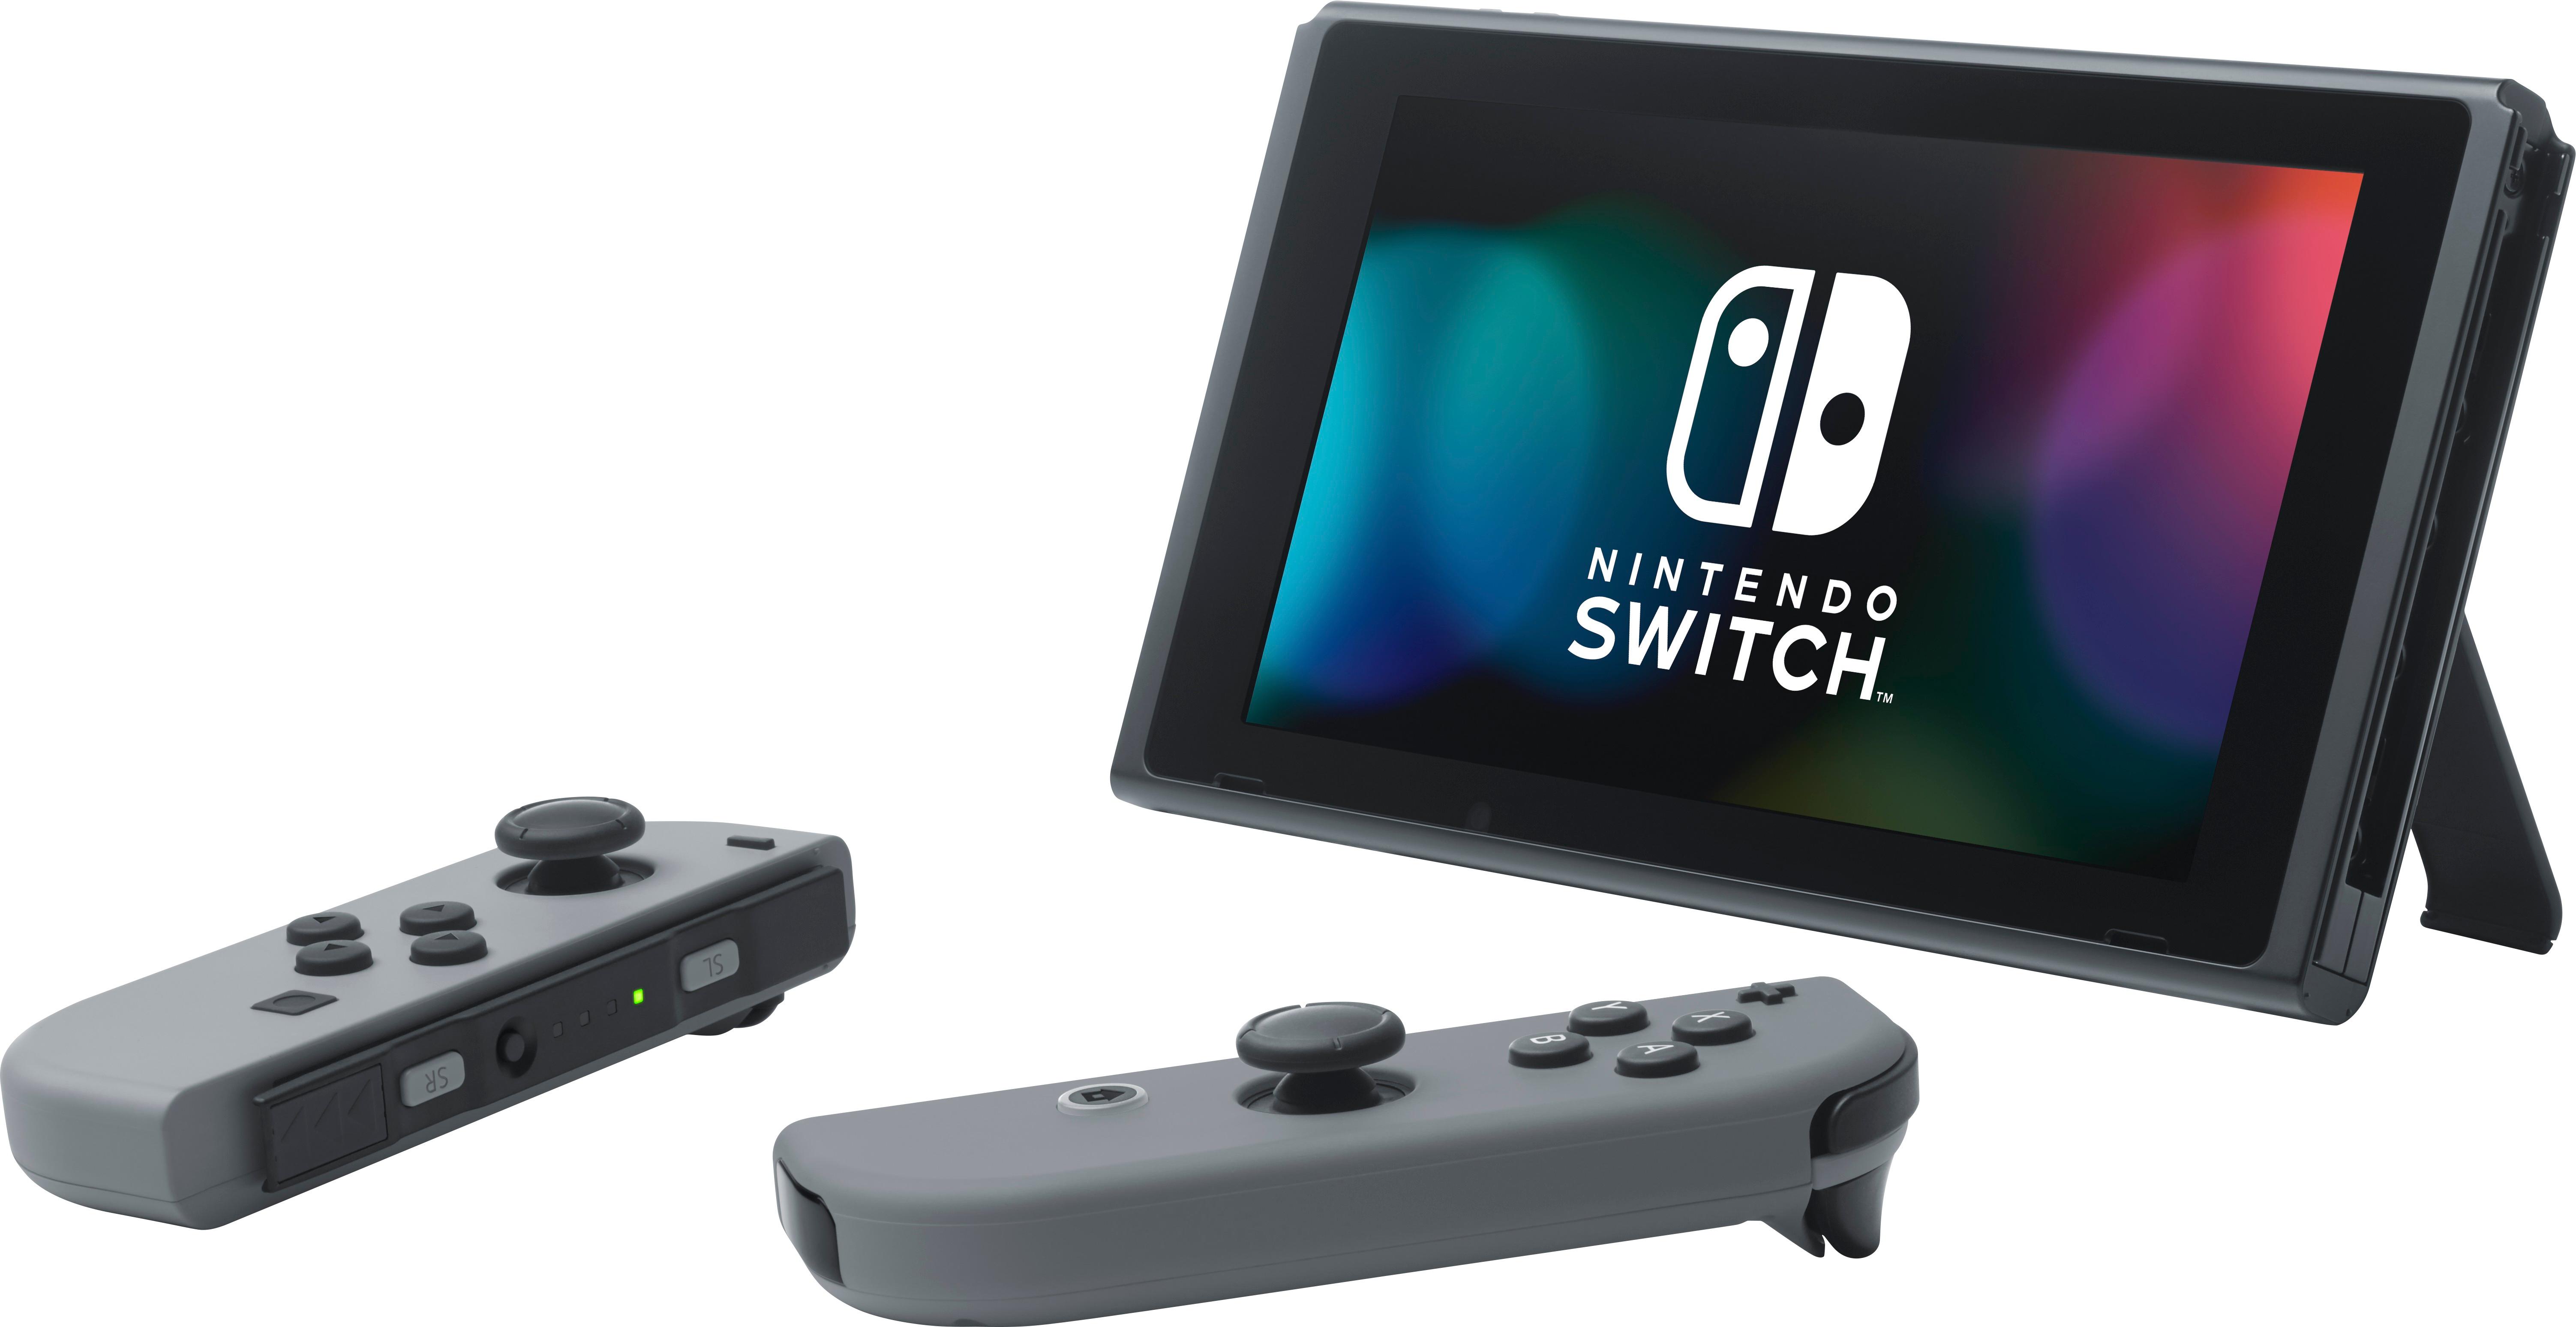 Nintendo Switch back in stock at Best Buy today, but get there early – BGR